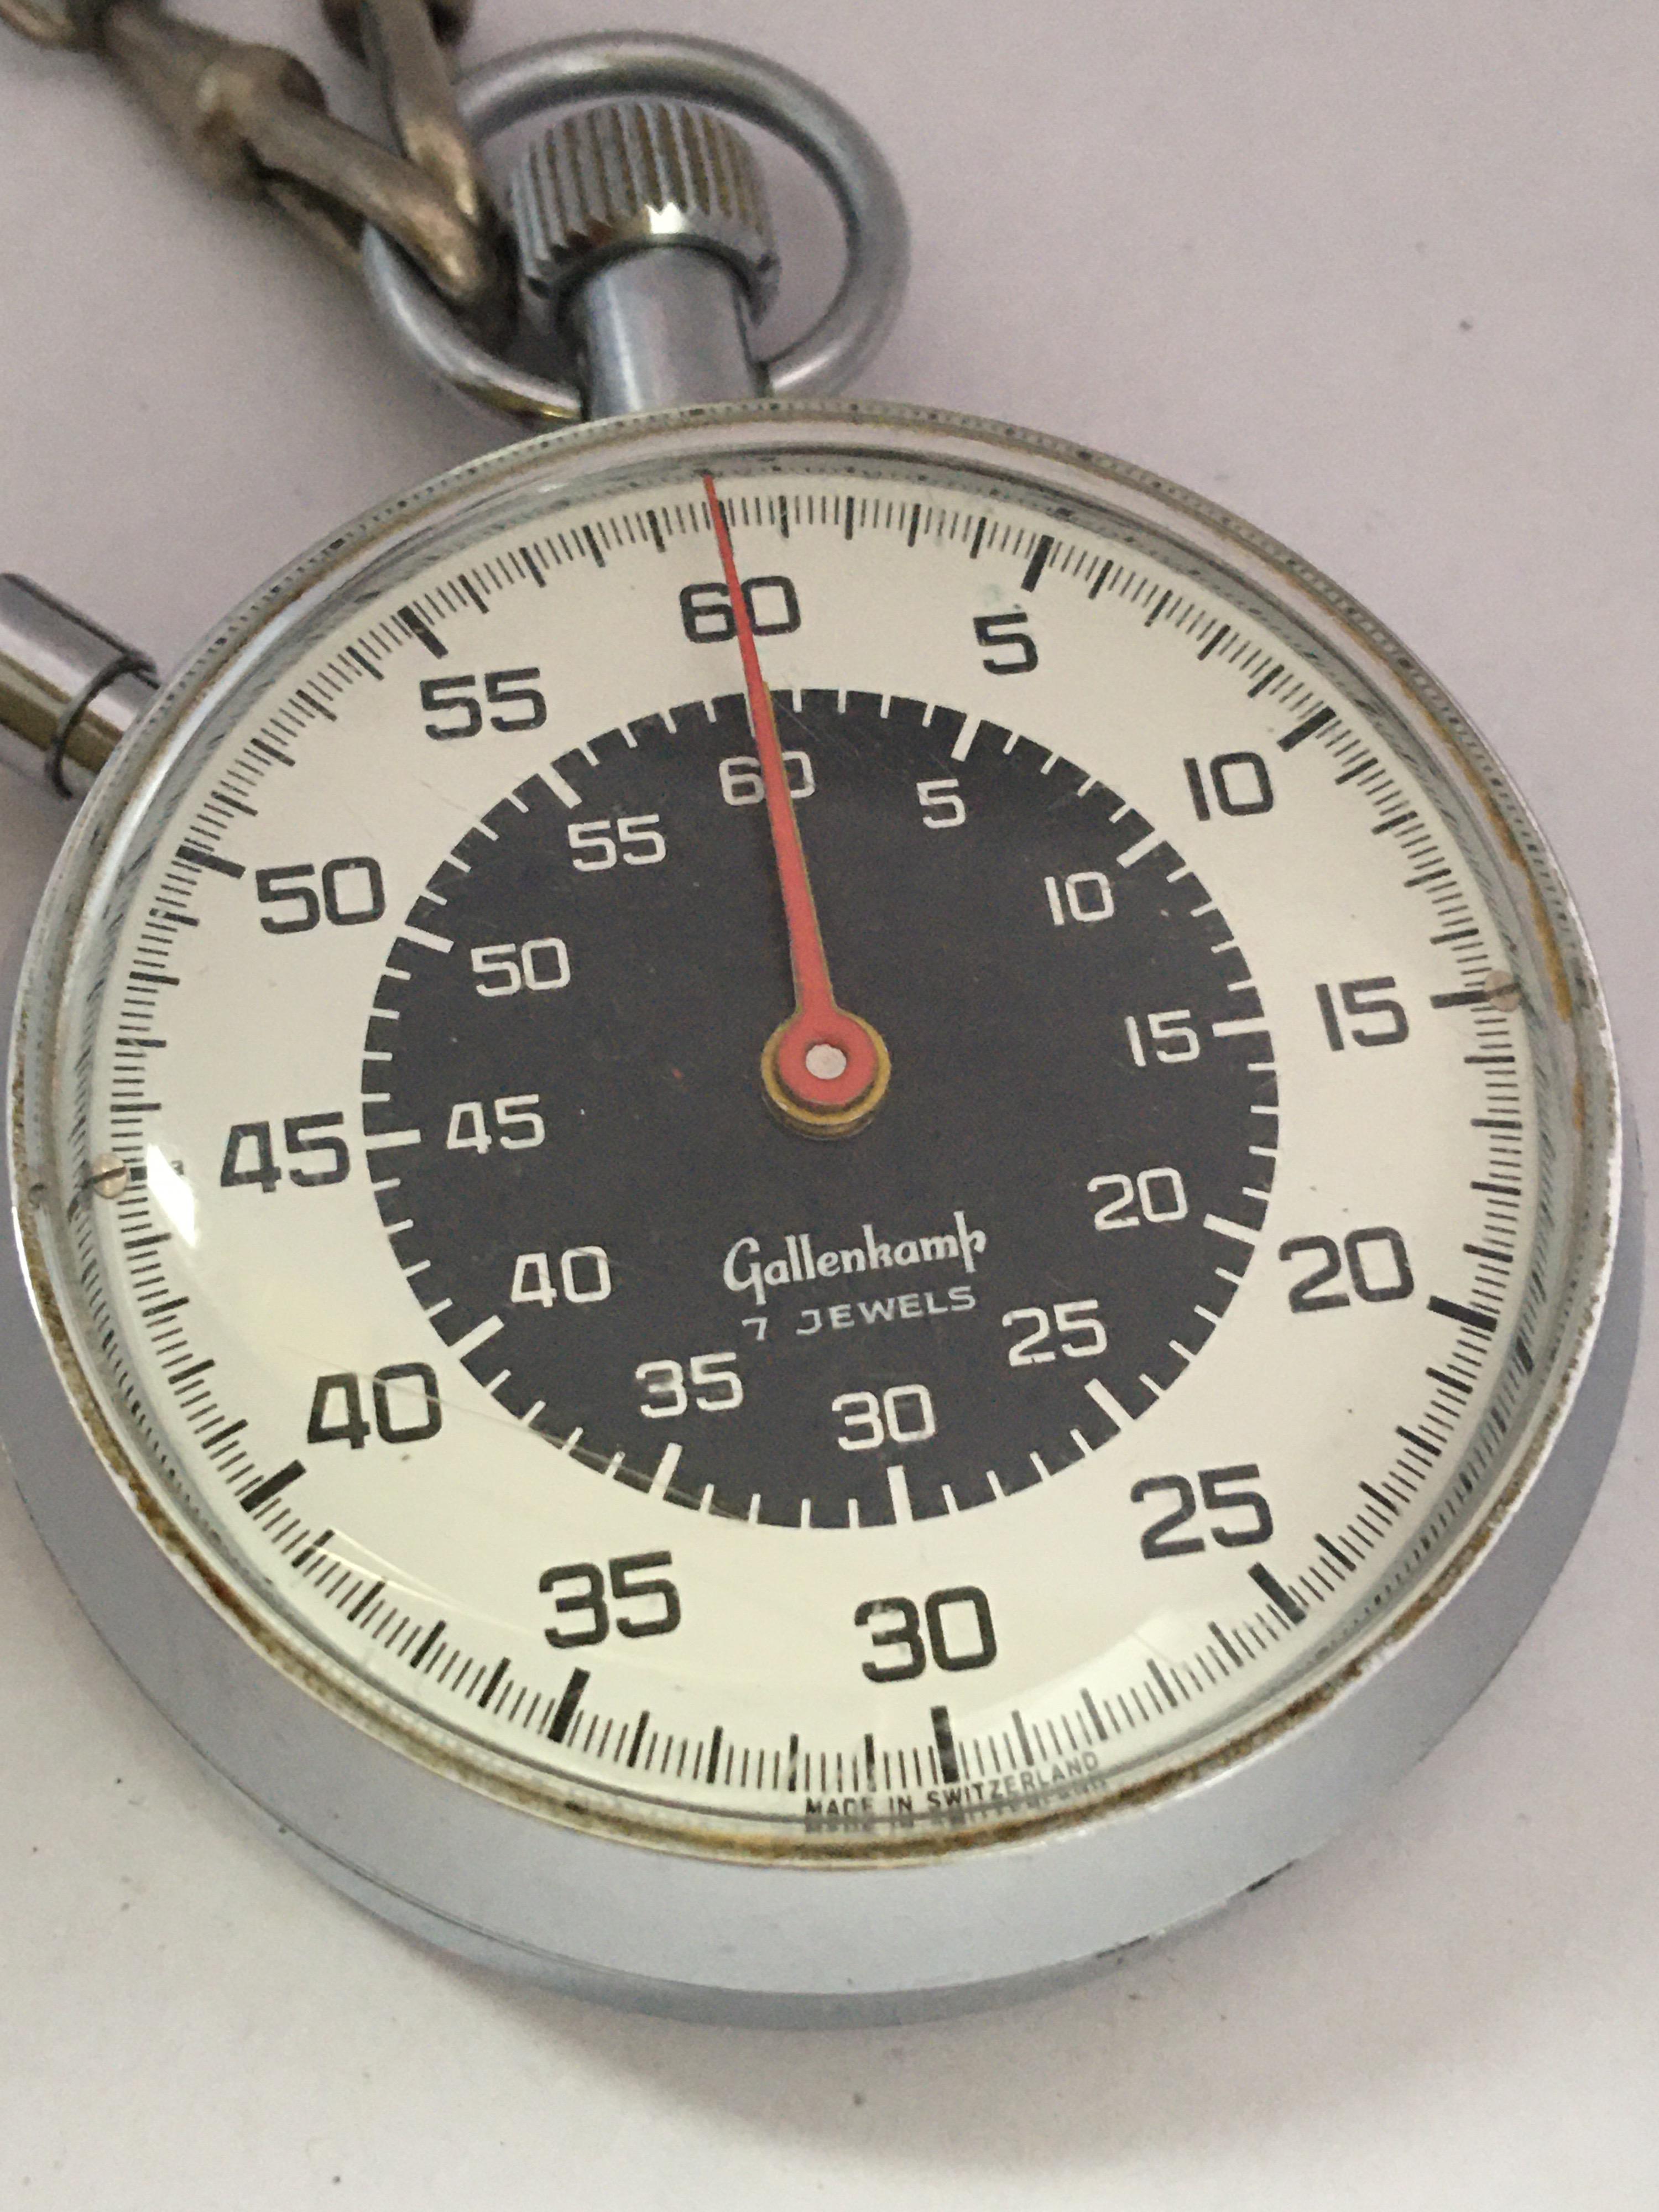 Vintage 1970s Swiss Made Mechanical Stopwatch for Gallenkamp For Sale 1